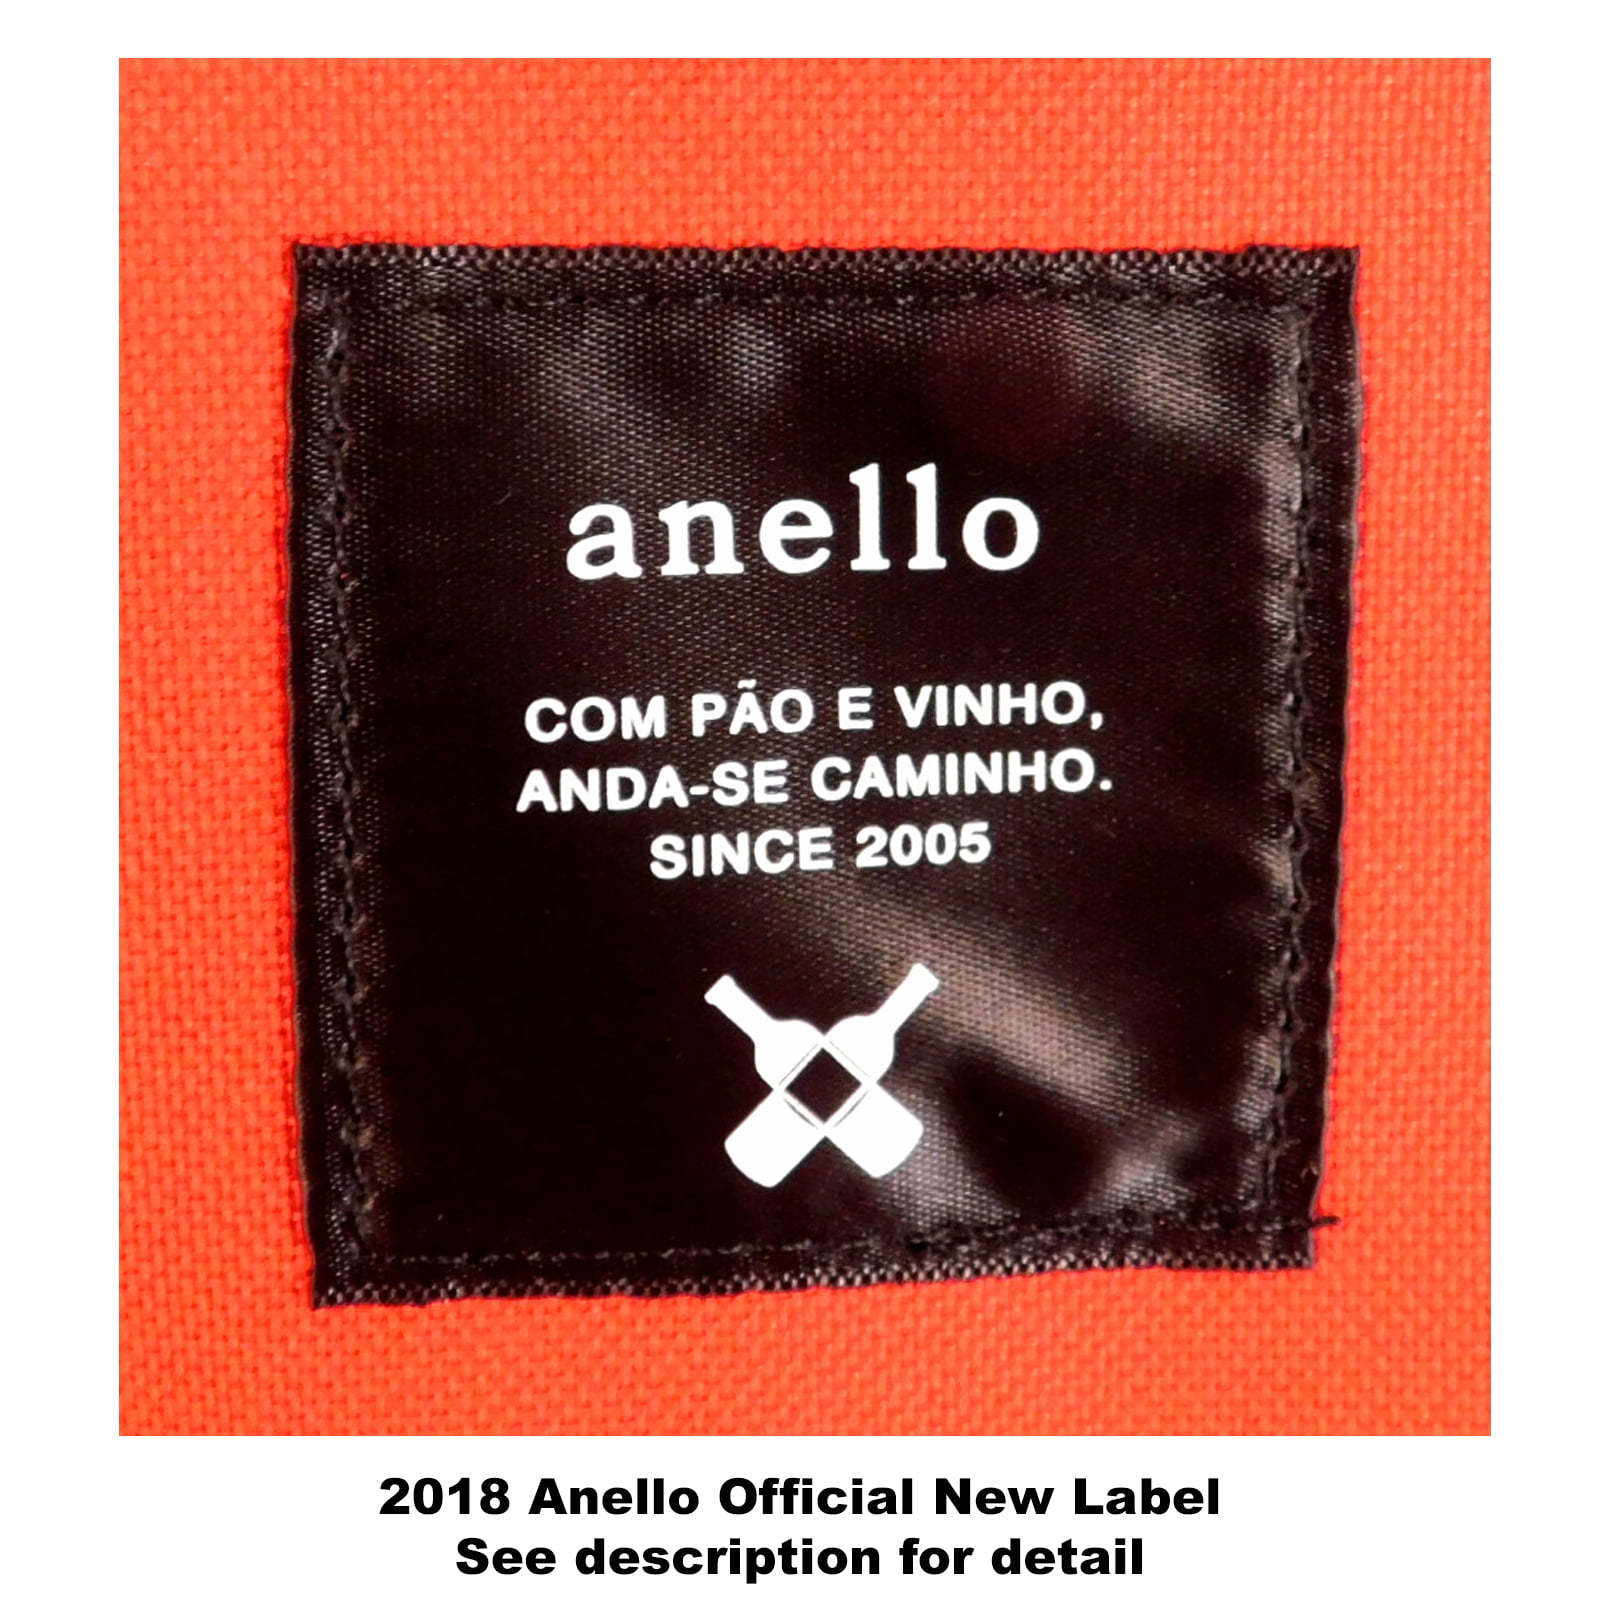 HOW TO FIND OUT IF YOUR ANELLO BAG IS FAKE OR REAL ORIGINAL